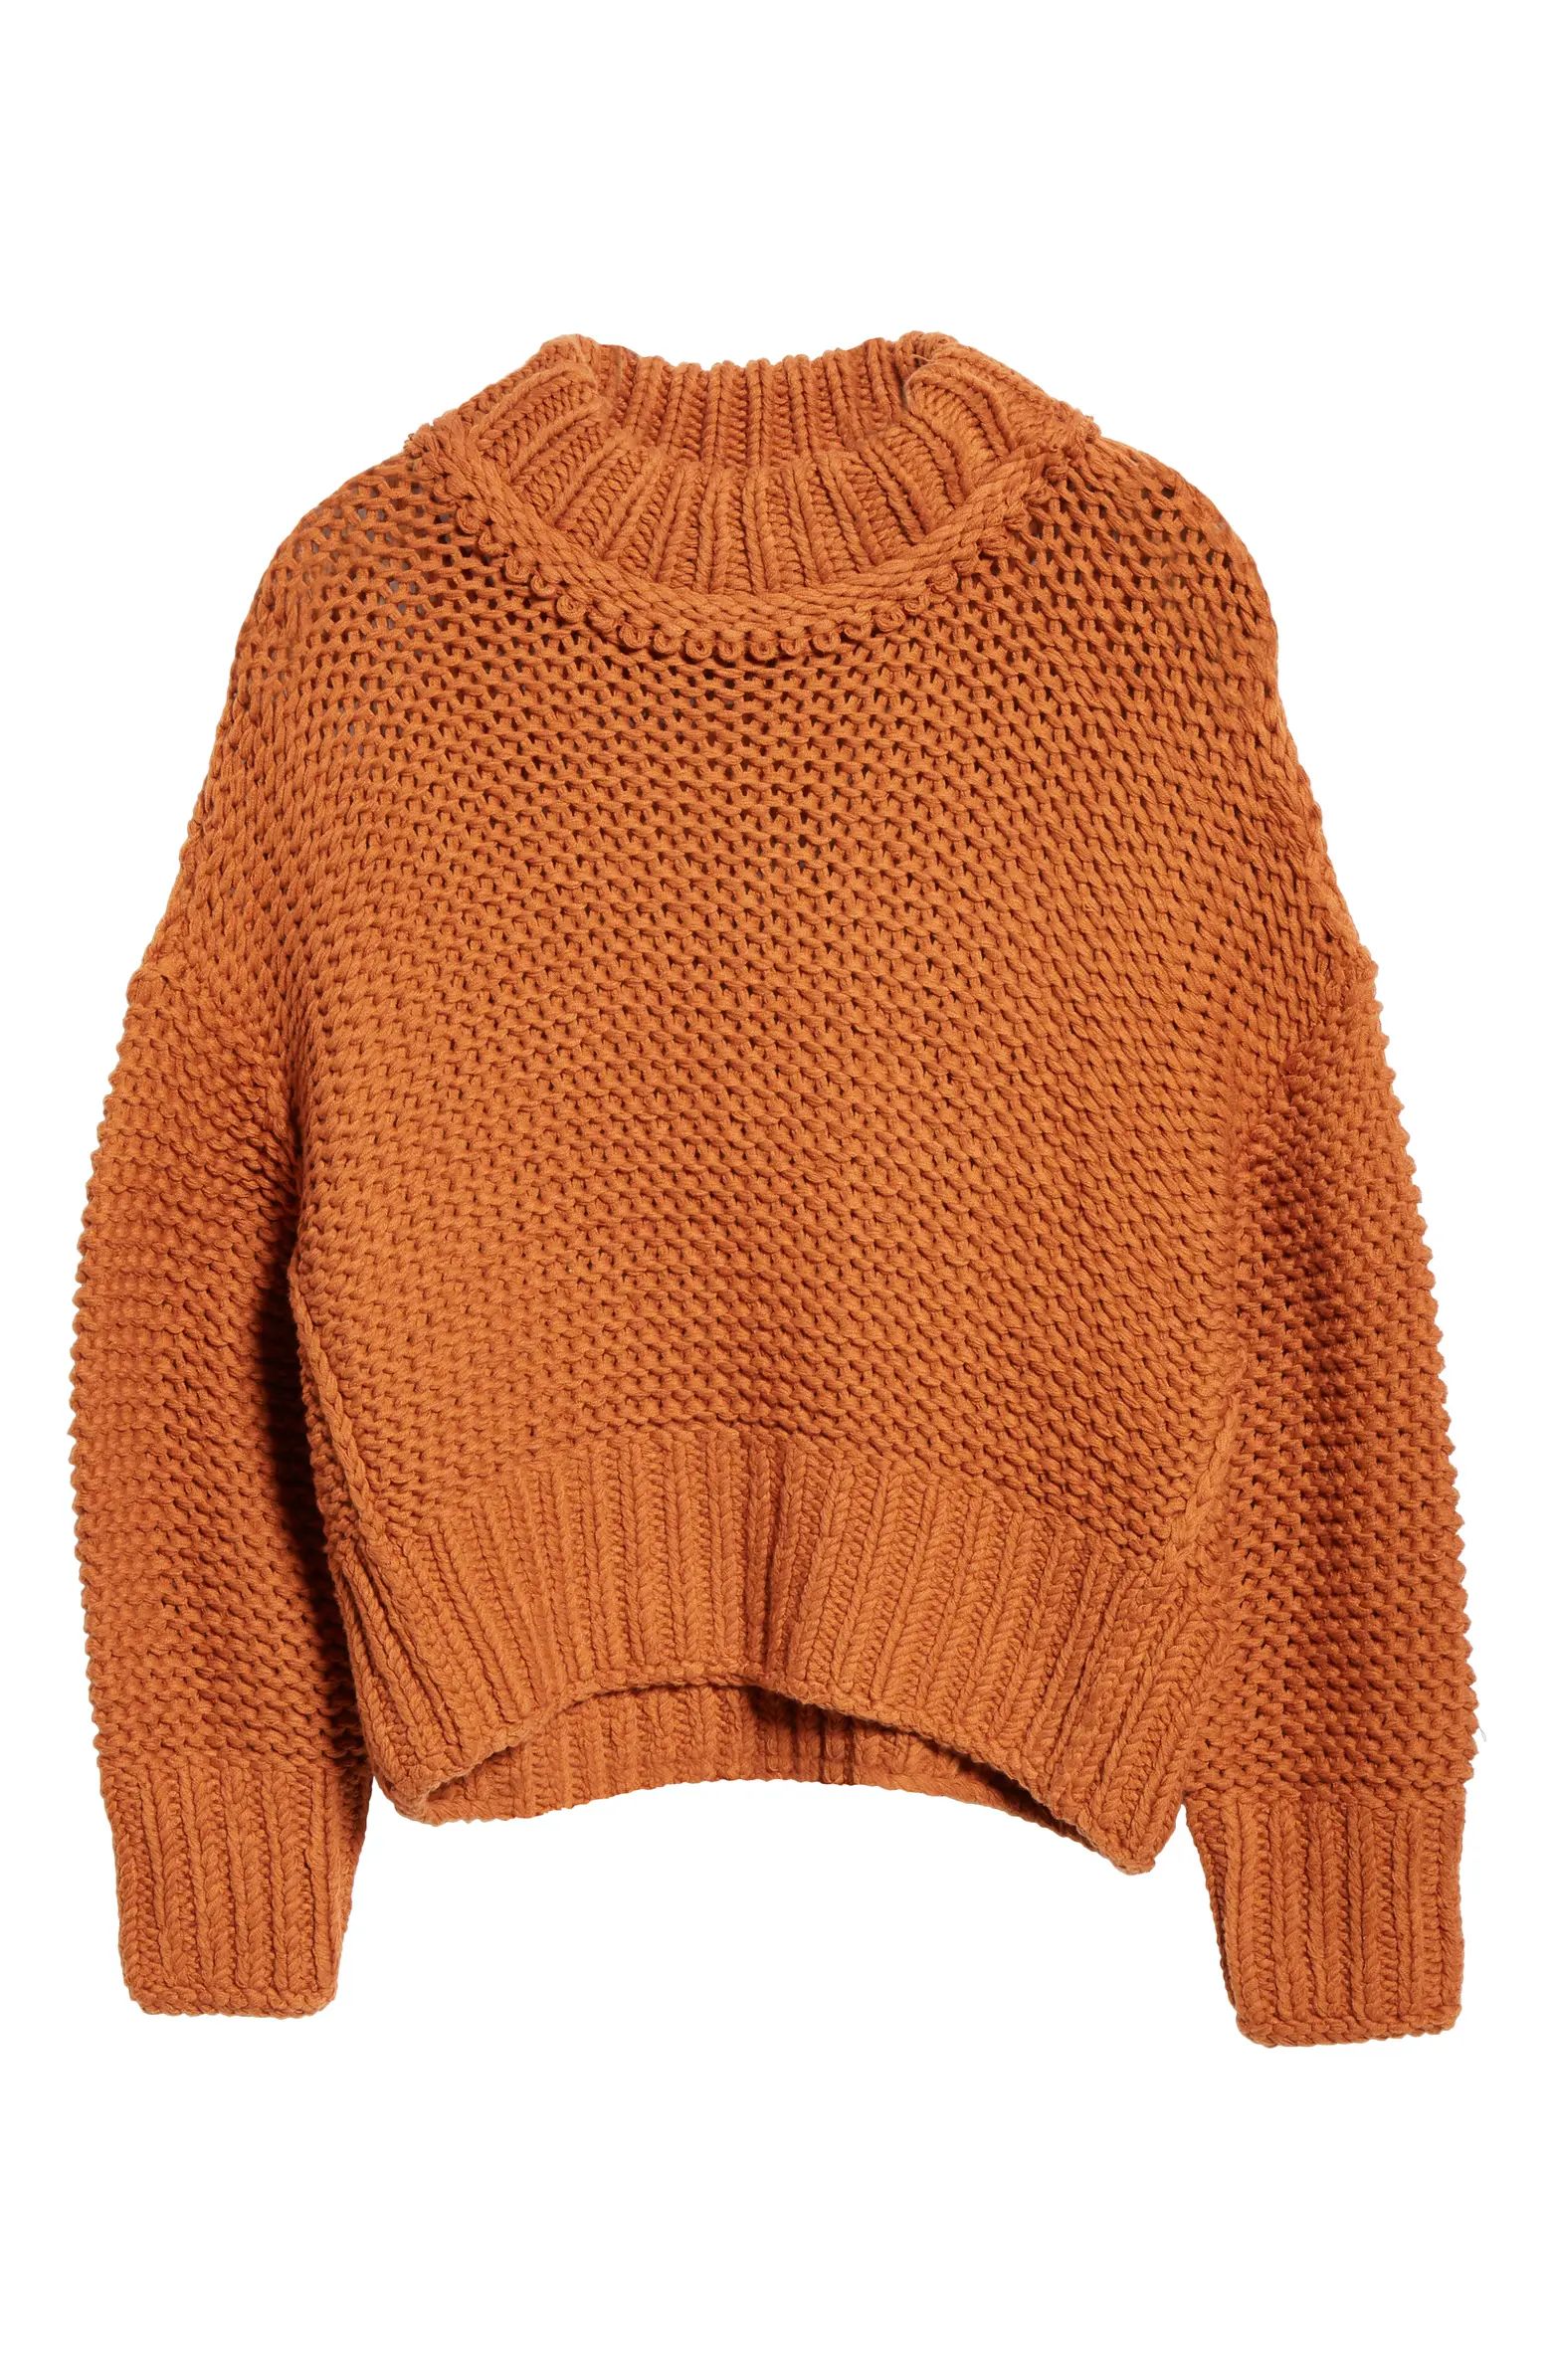 My Only Sunshine Sweater | Nordstrom